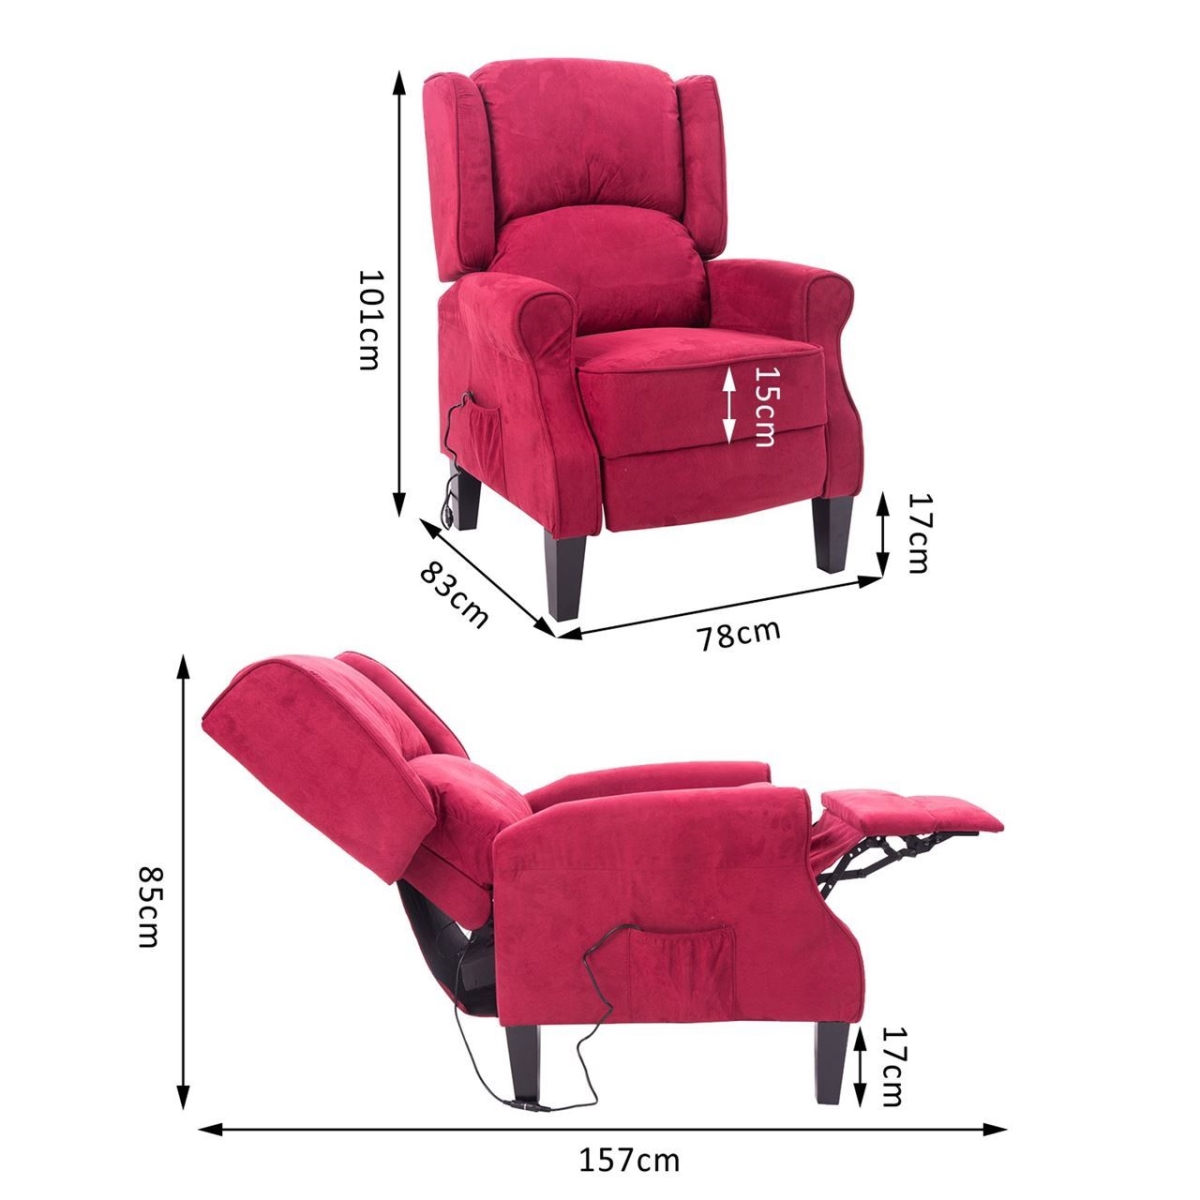 Online Gym Shop Cb16698 Heated Vibrating Suede Massage Recliner Chair, Red